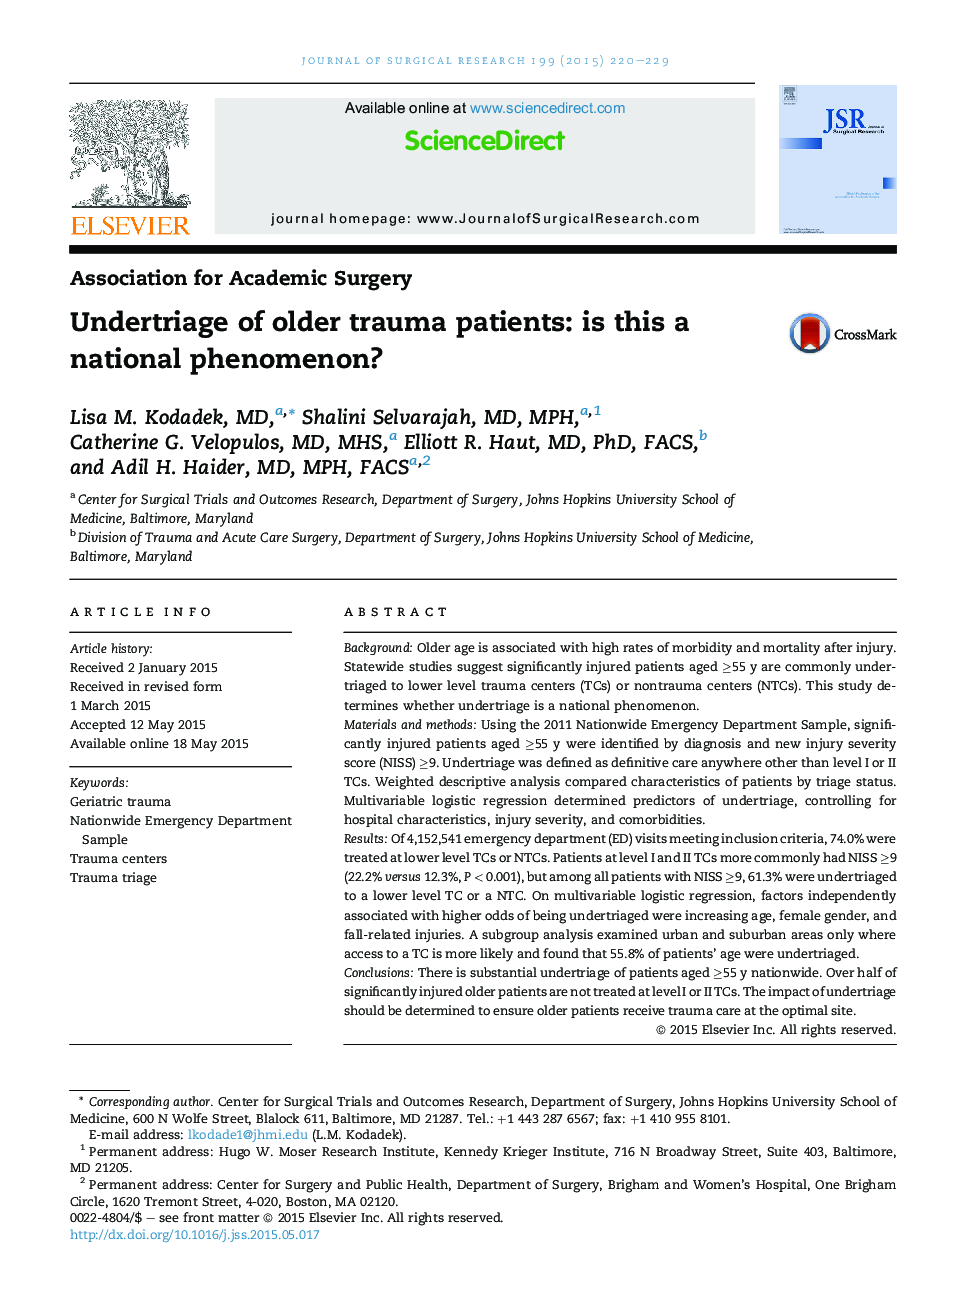 Undertriage of older trauma patients: is this a national phenomenon?